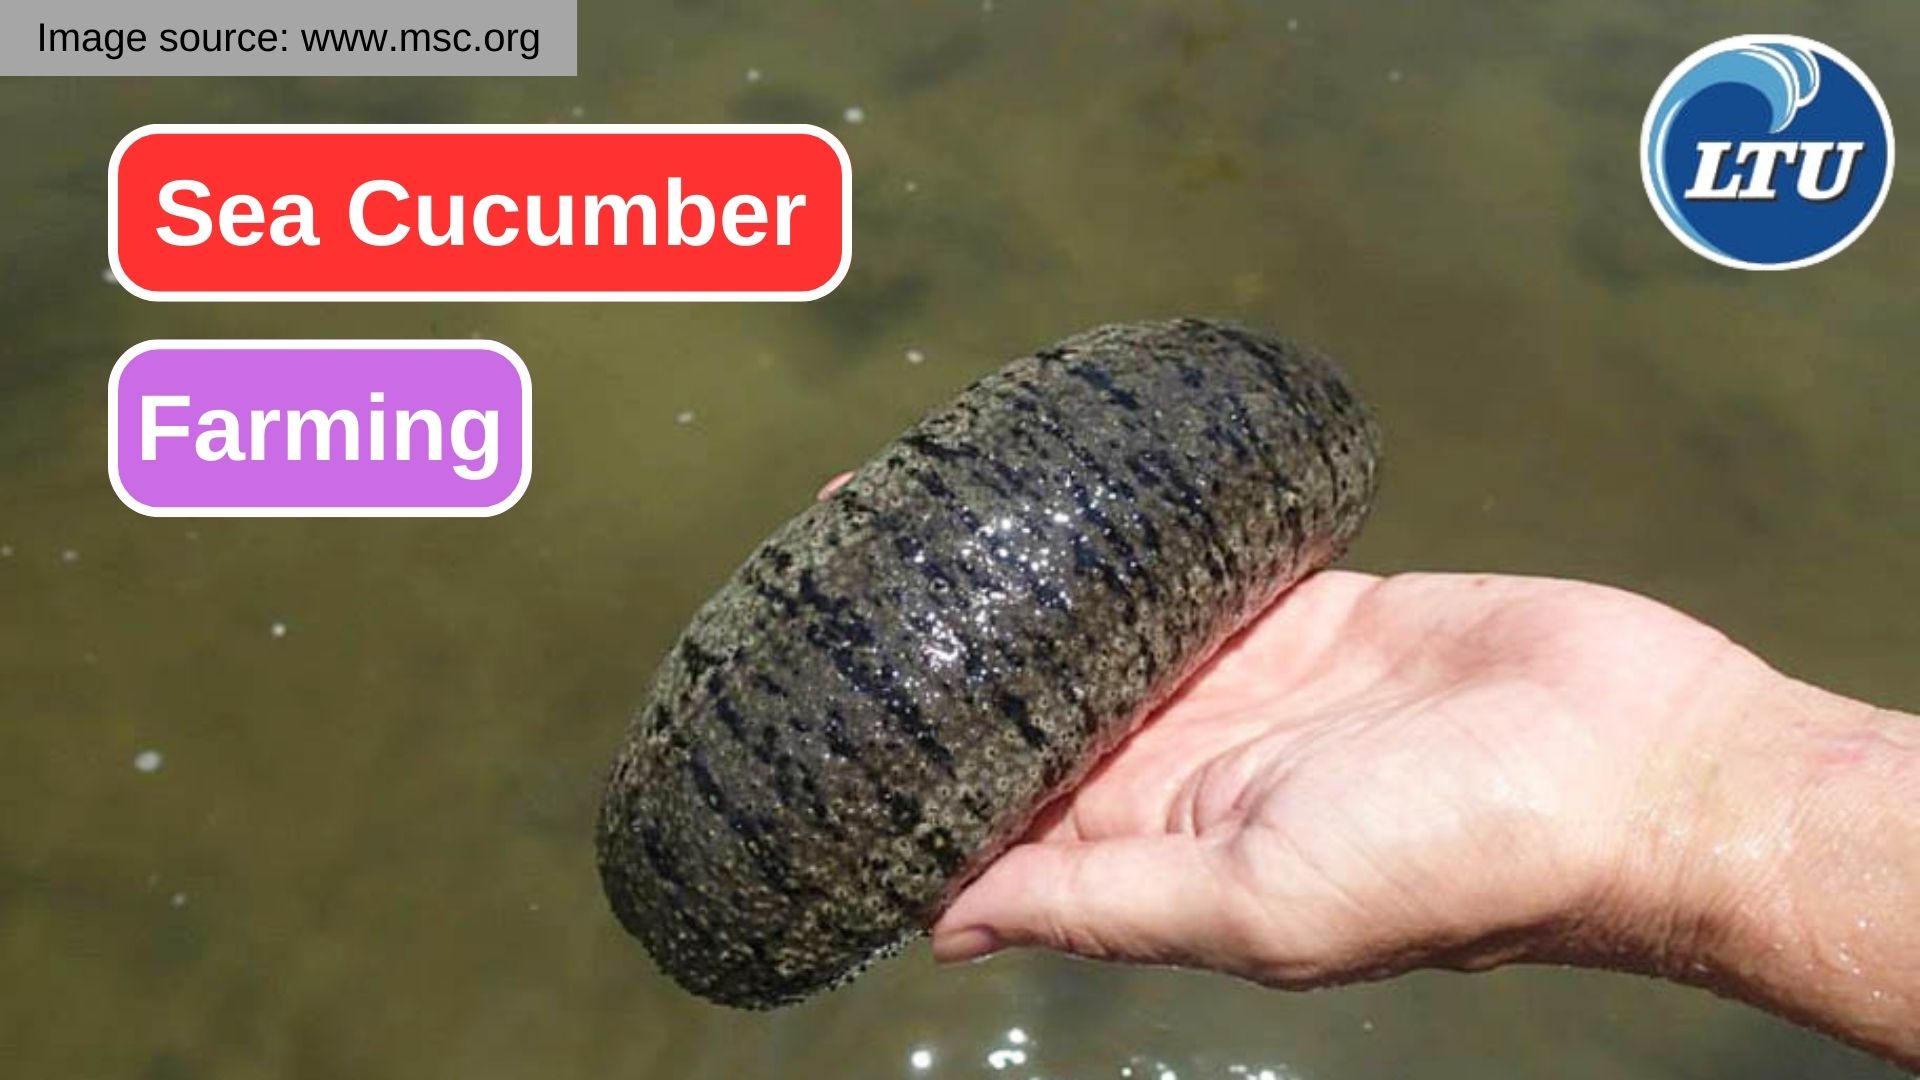 Sea Cucumber Farming Business: Learn the Opportunities and Challenges